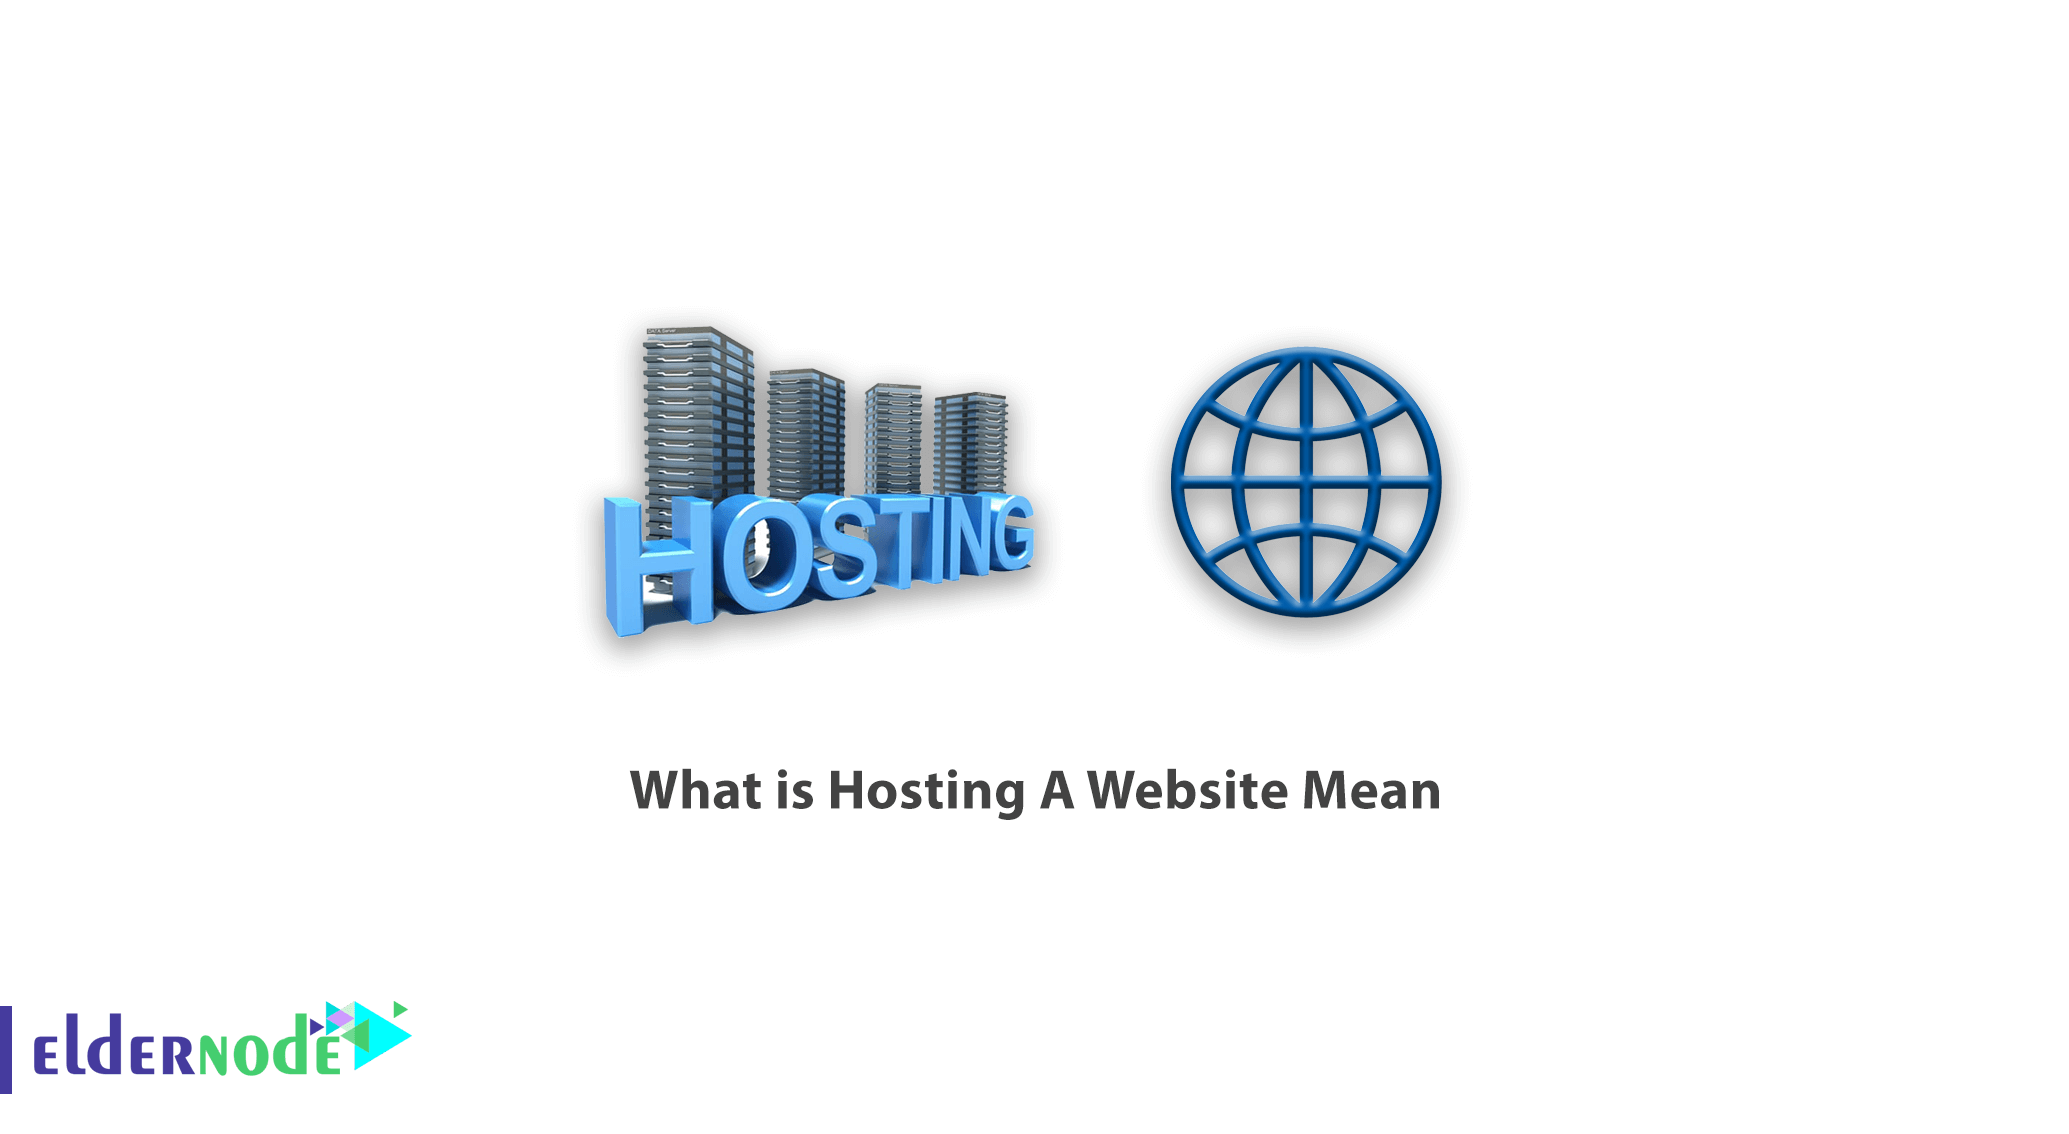 What is Hosting A Website Mean